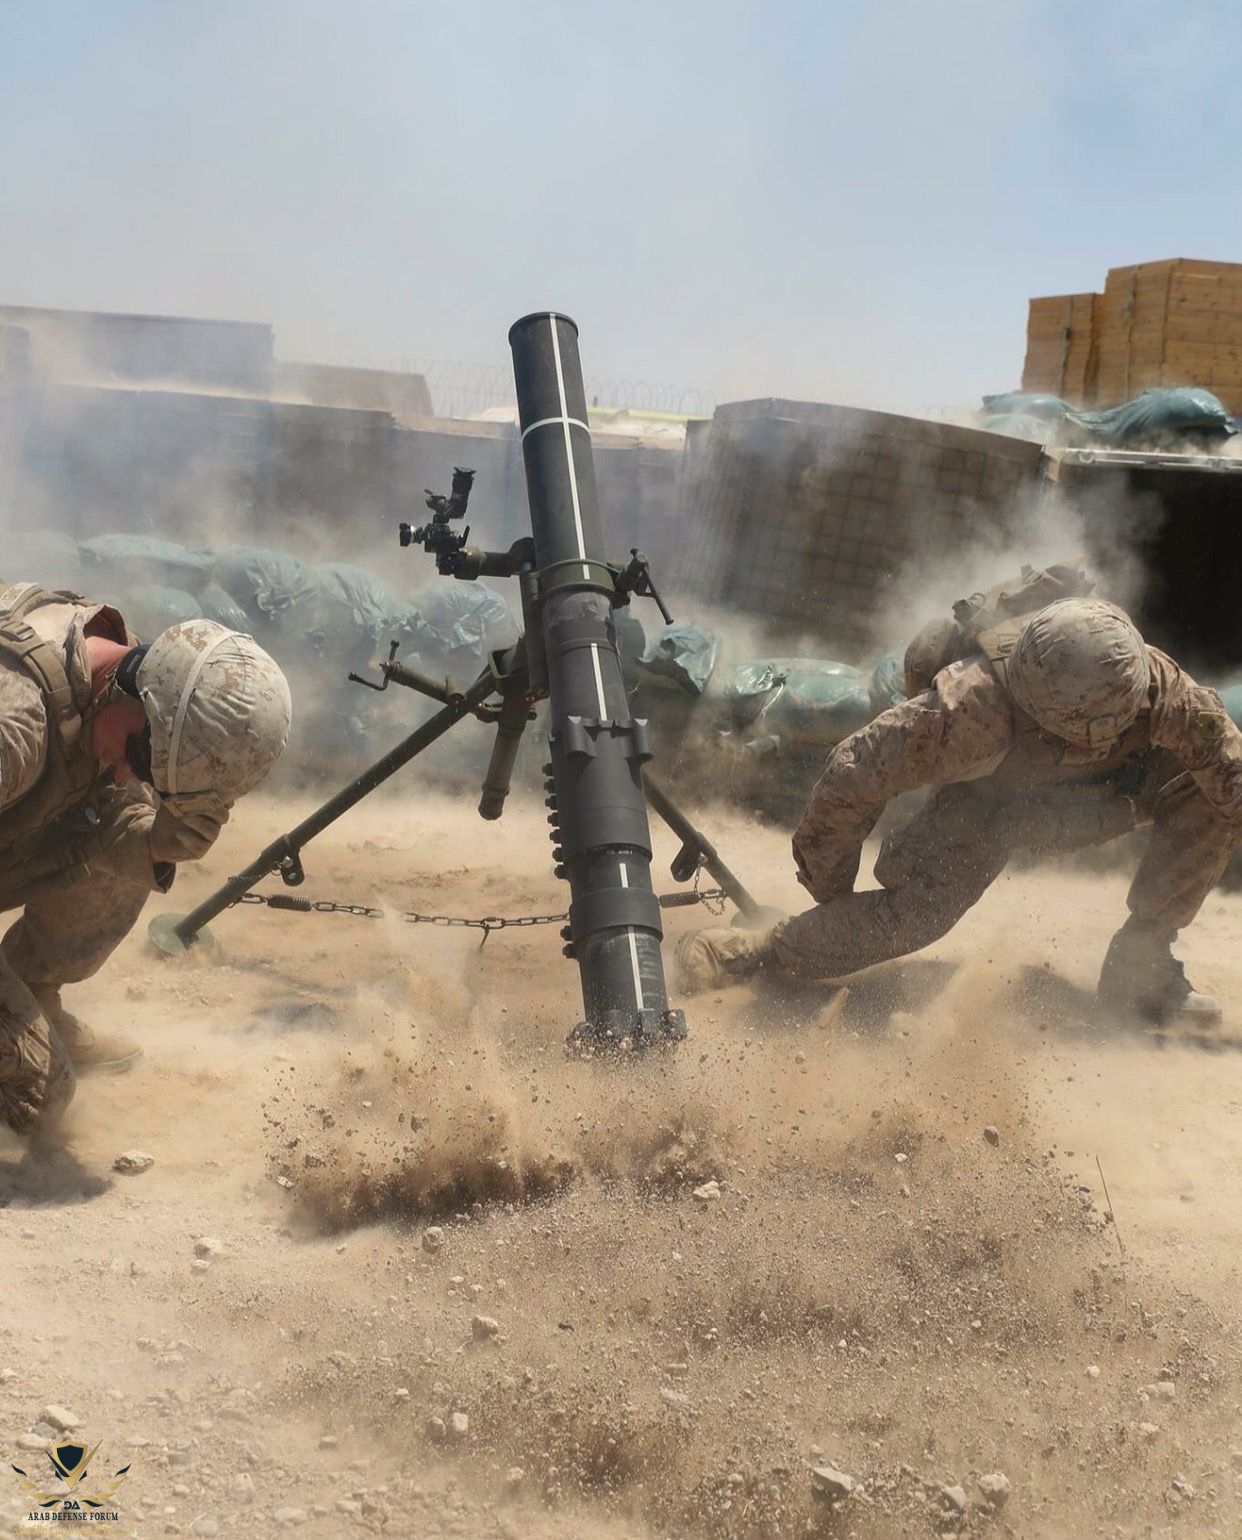 Hope you have a great mid week Fire for Effect! #humpday #mortars #11C #infantry #soldier #gr...jpeg